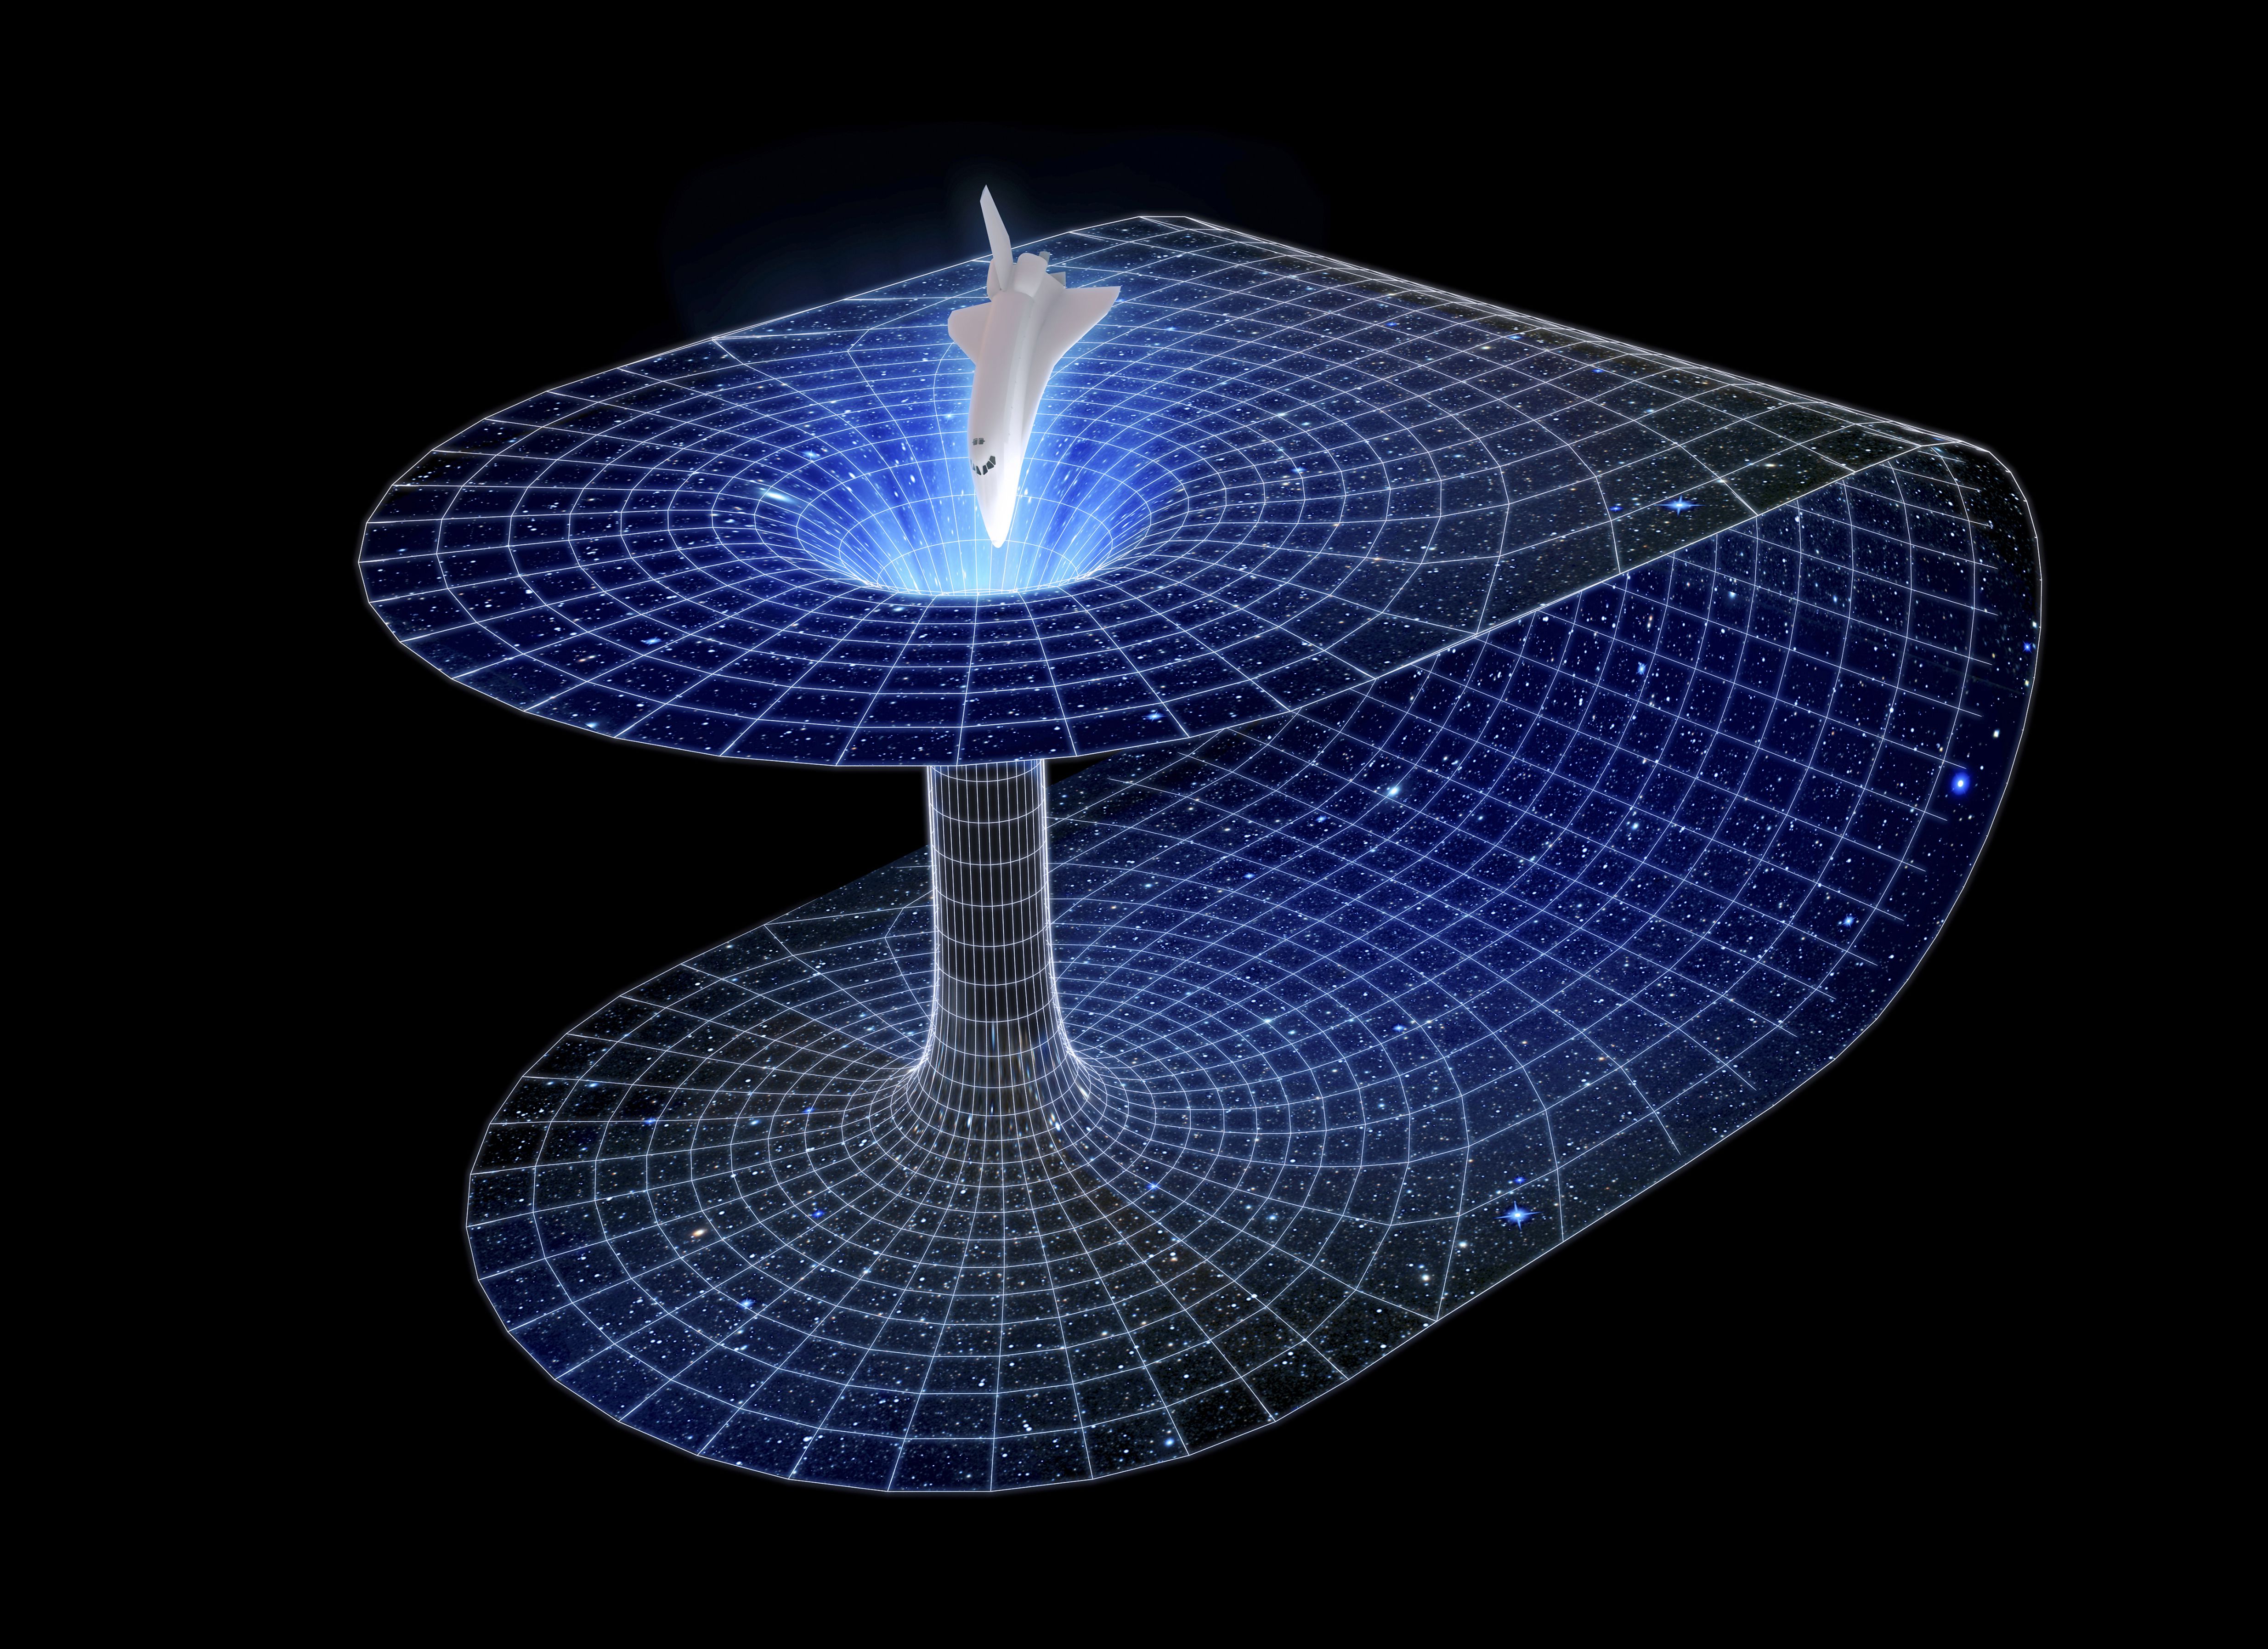 quantum physics is time travel possible